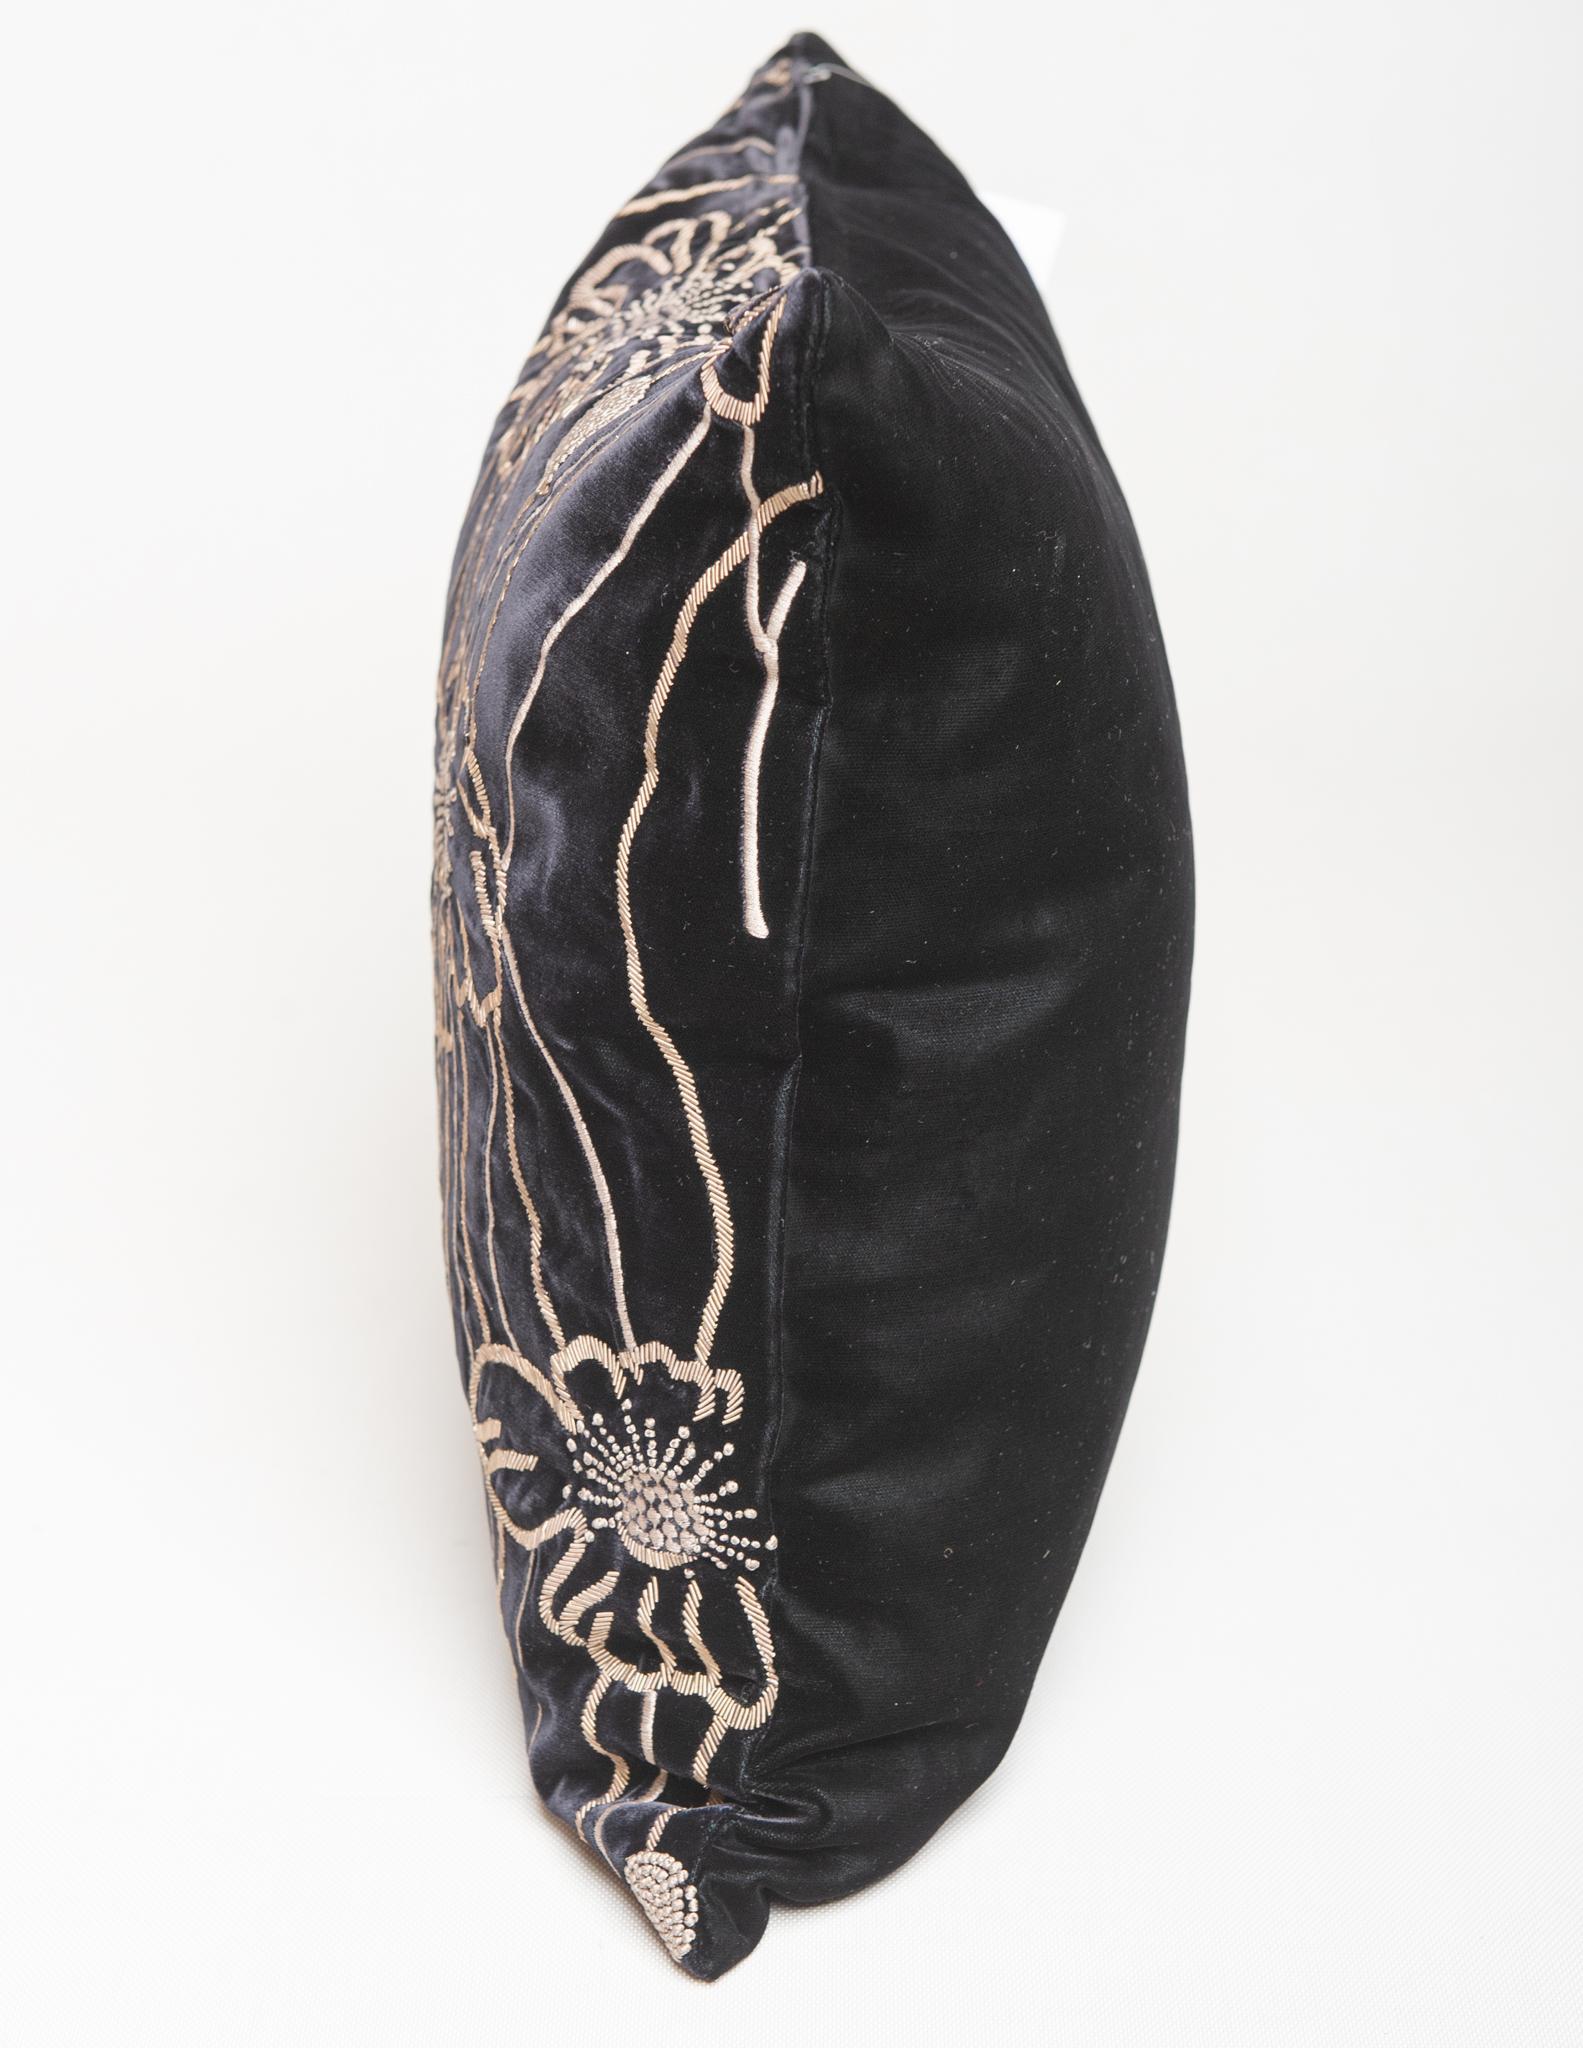 Pillow in Embroidered Black Velvet In Excellent Condition For Sale In Alessandria, Piemonte